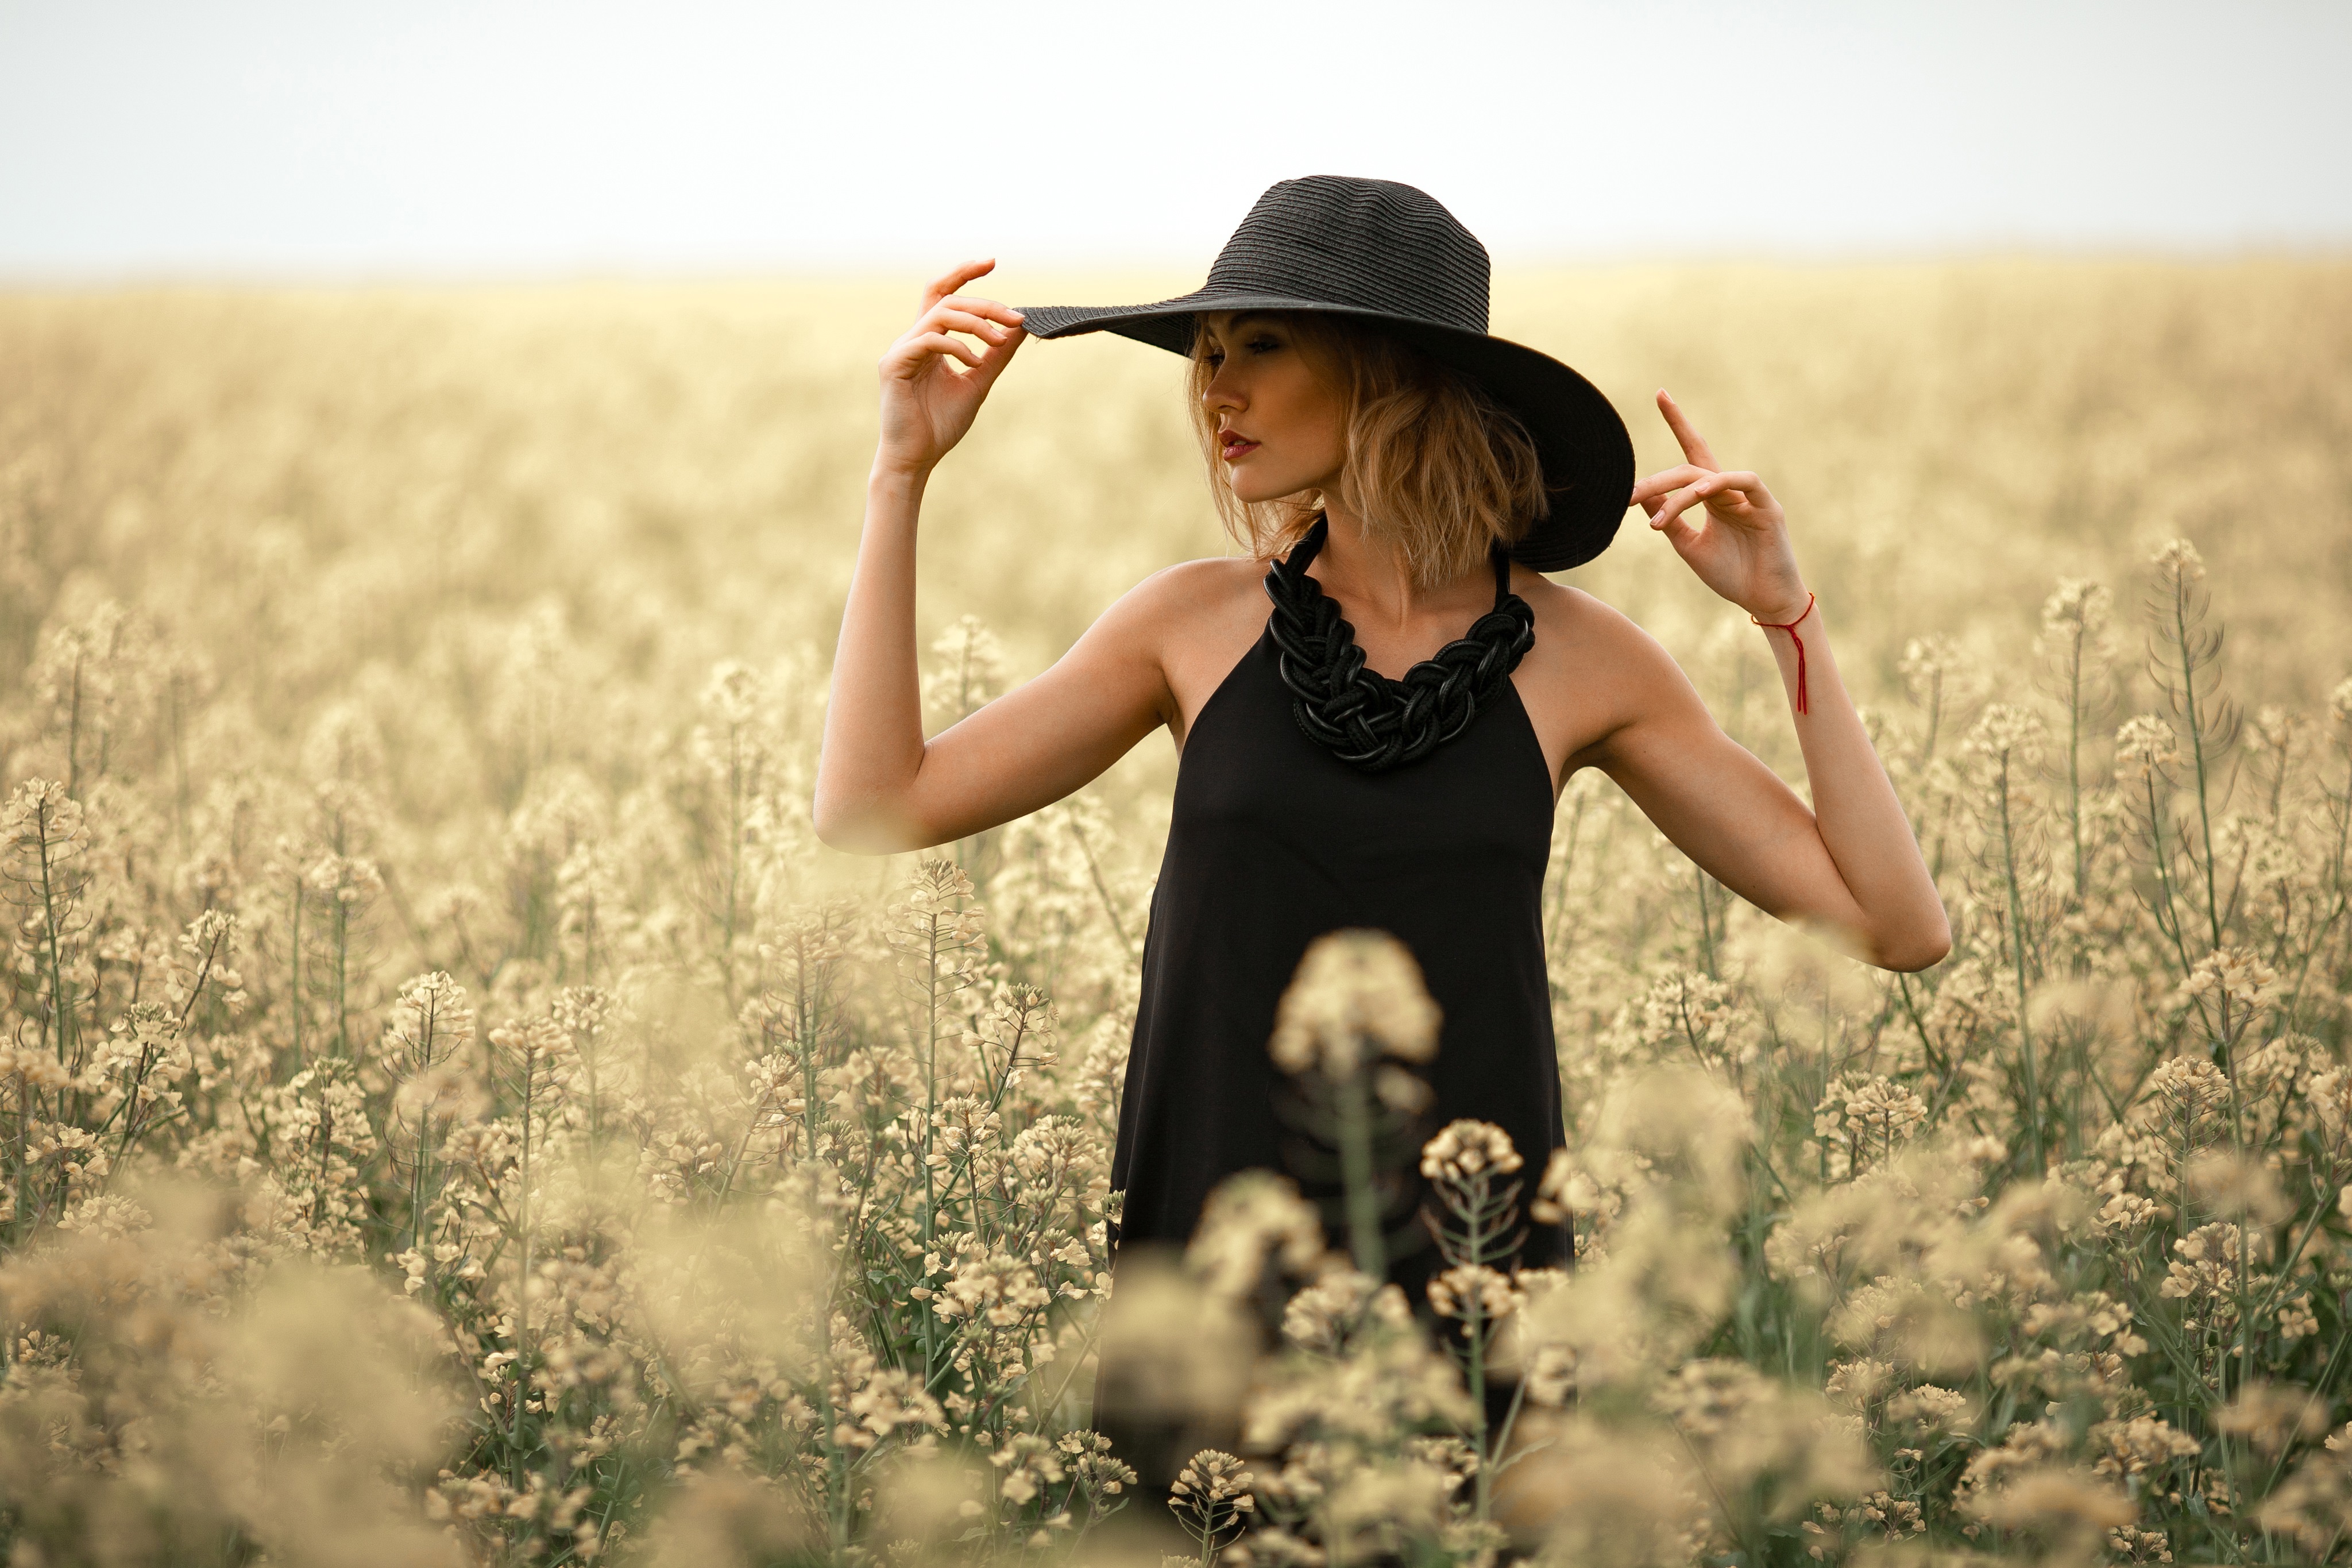 Women Hat Flowers Black Clothing Blonde Model Looking At The Side Field Summer Nature Sunlight 4095x2730